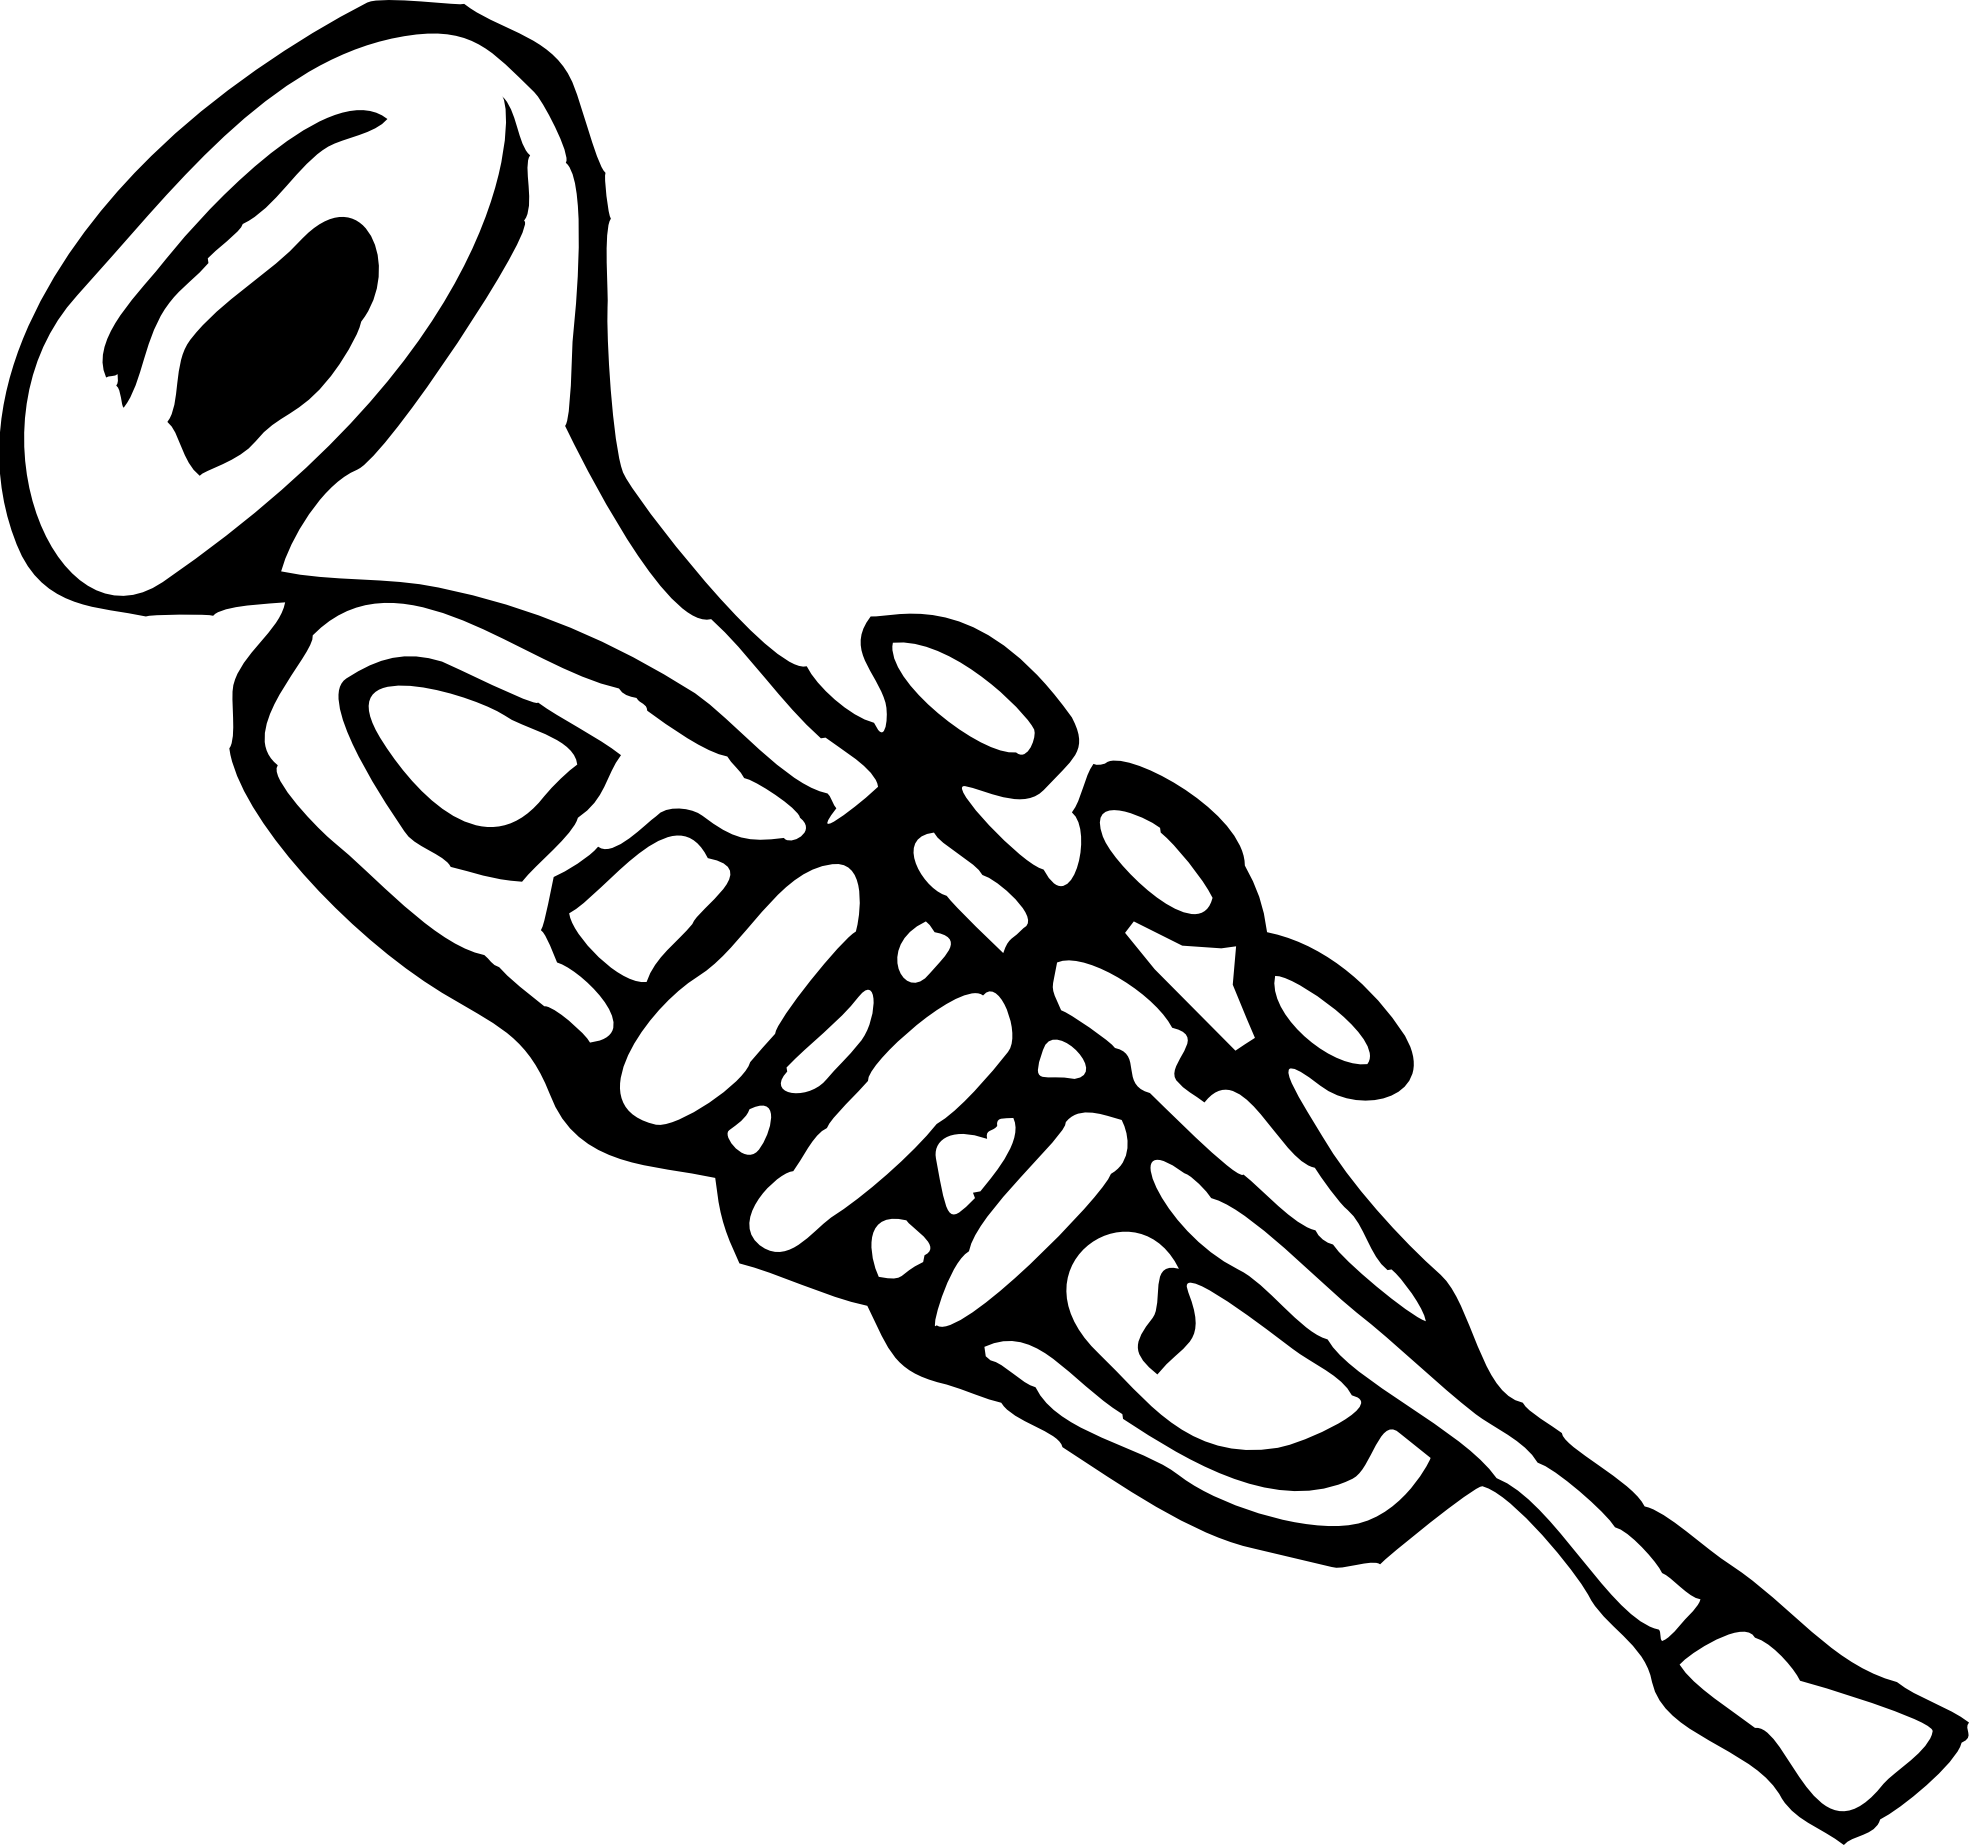 horn clipart black and white